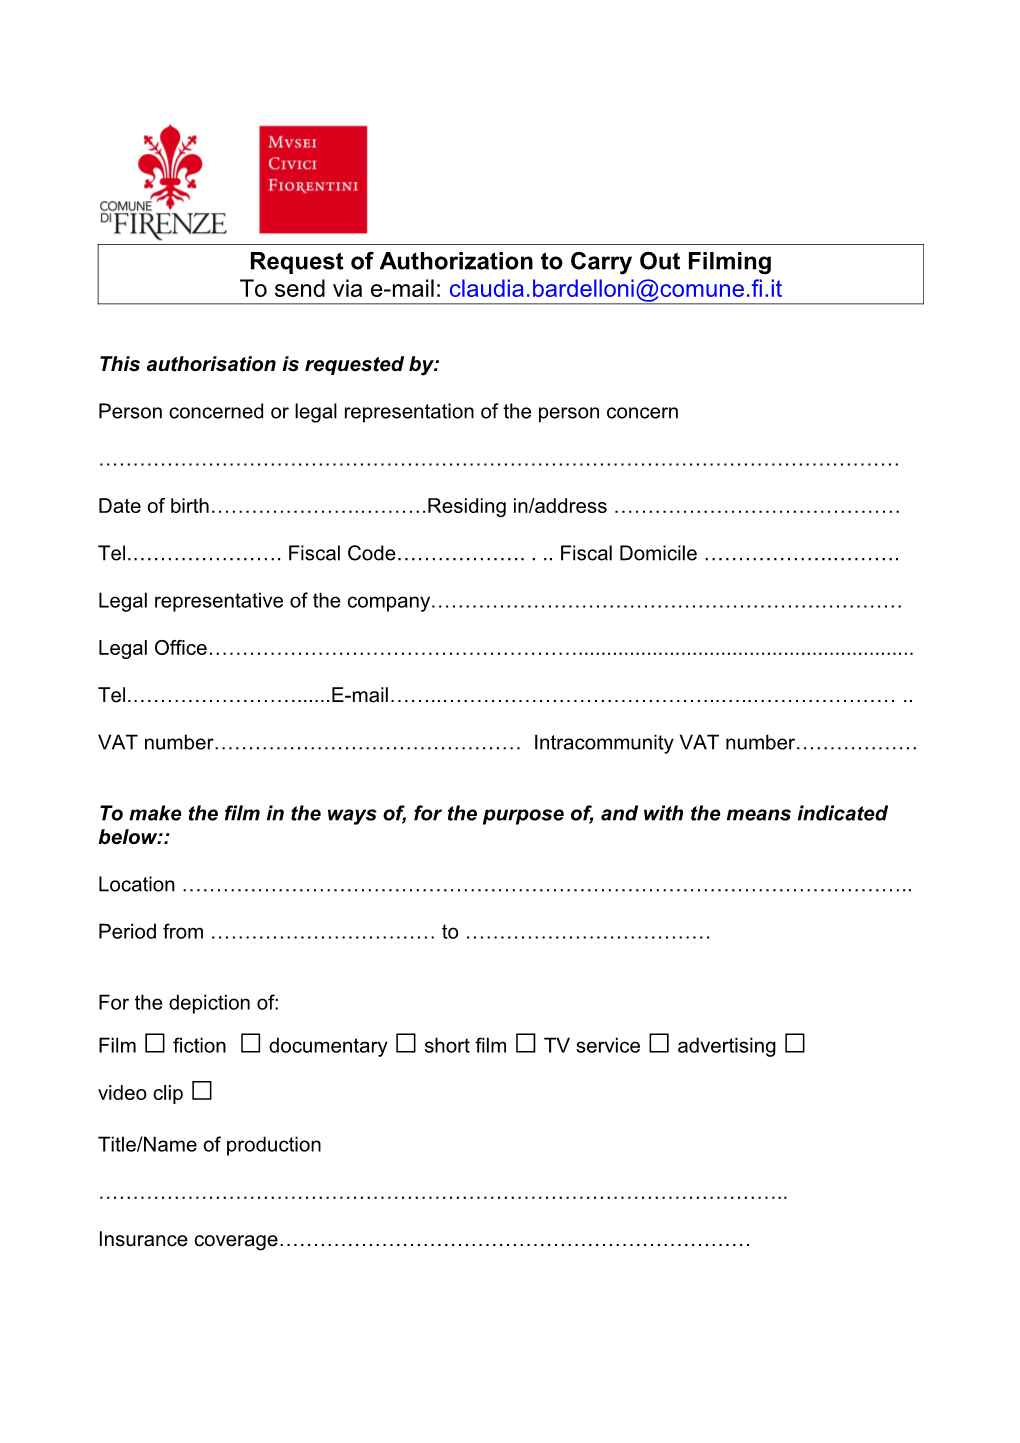 Request of Authorization to Carry out Filming